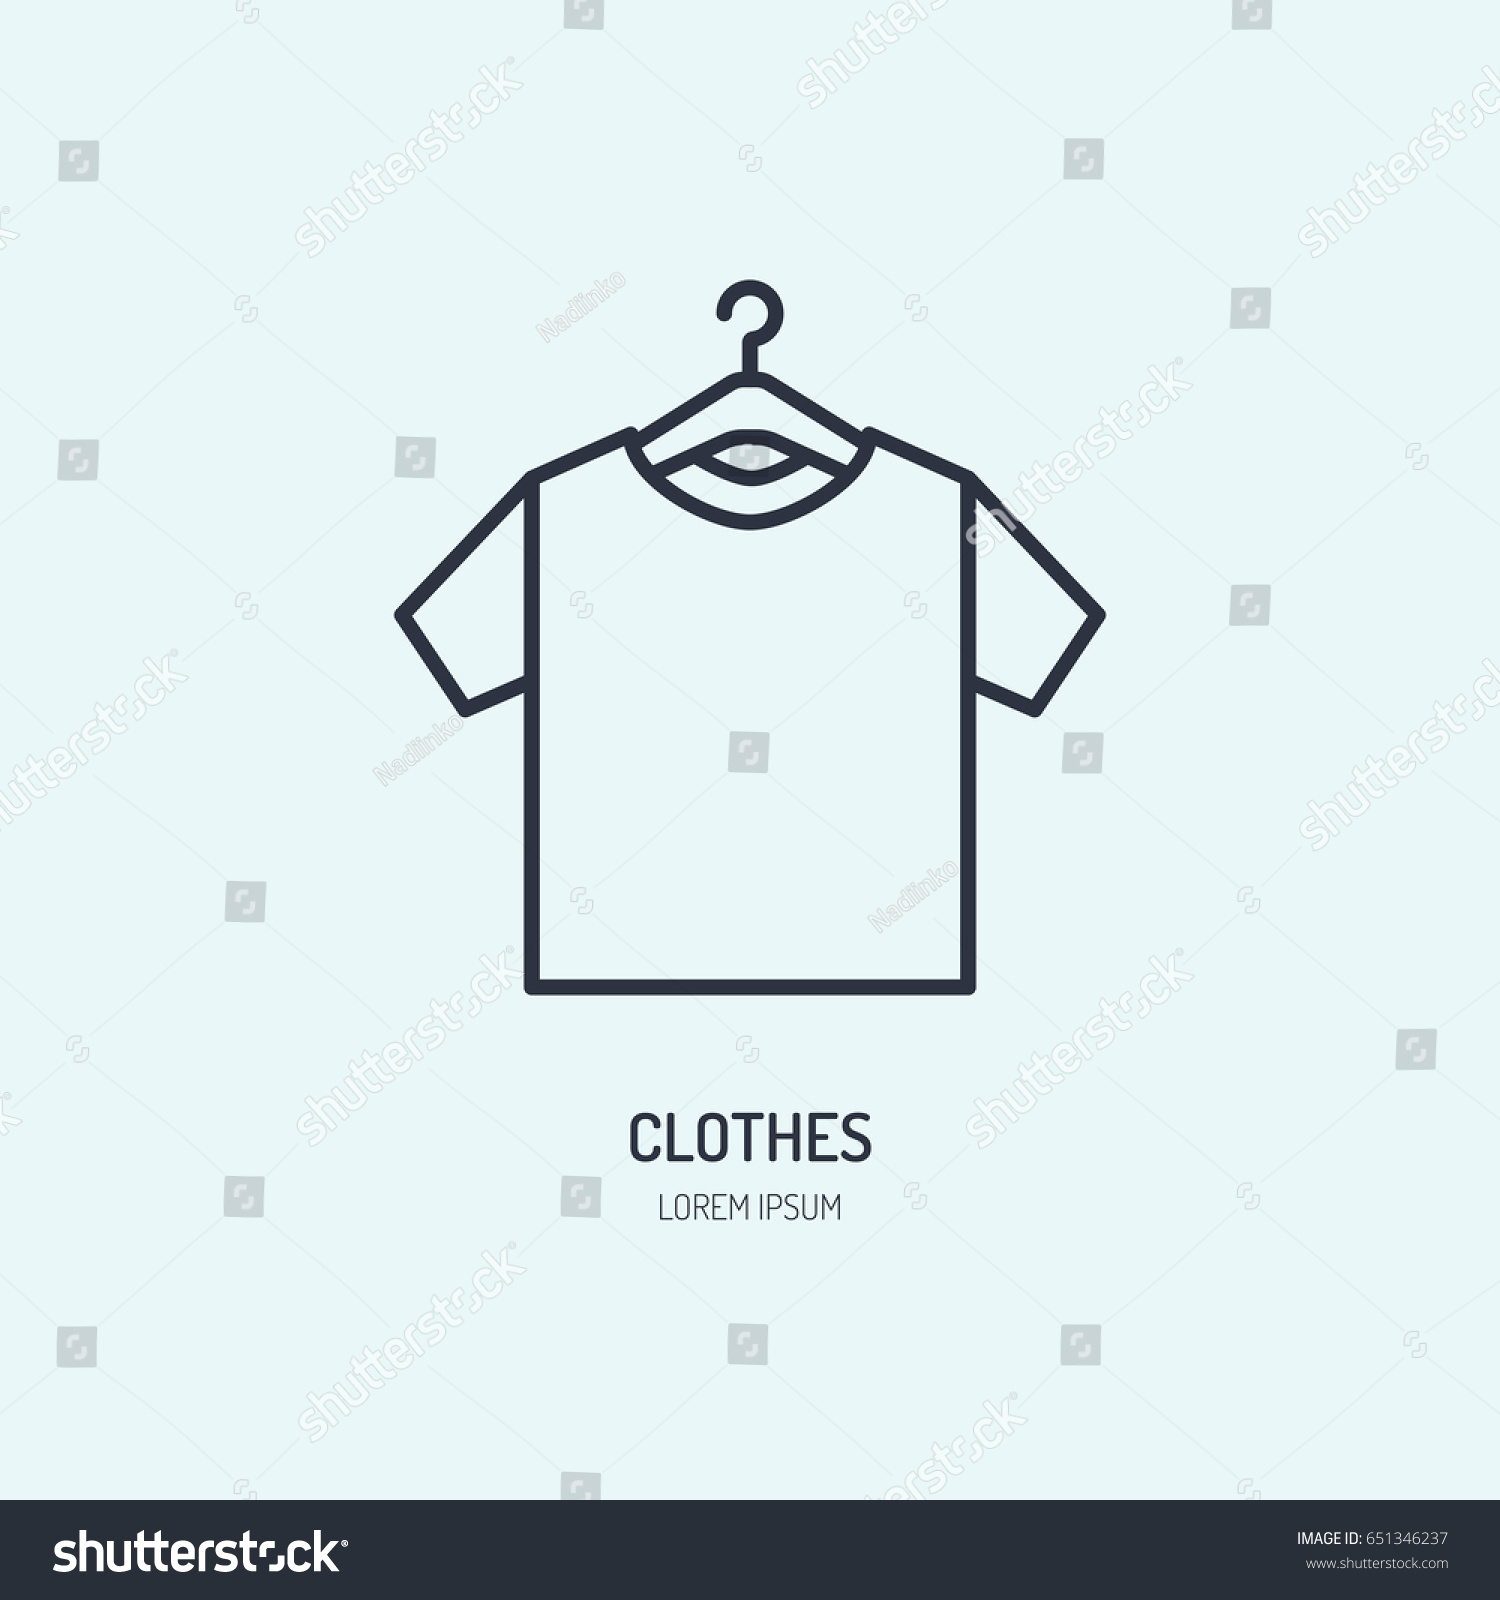 Tshirt On Hanger Icon Clothing Shop Stock Vector 651346237 - Shutterstock